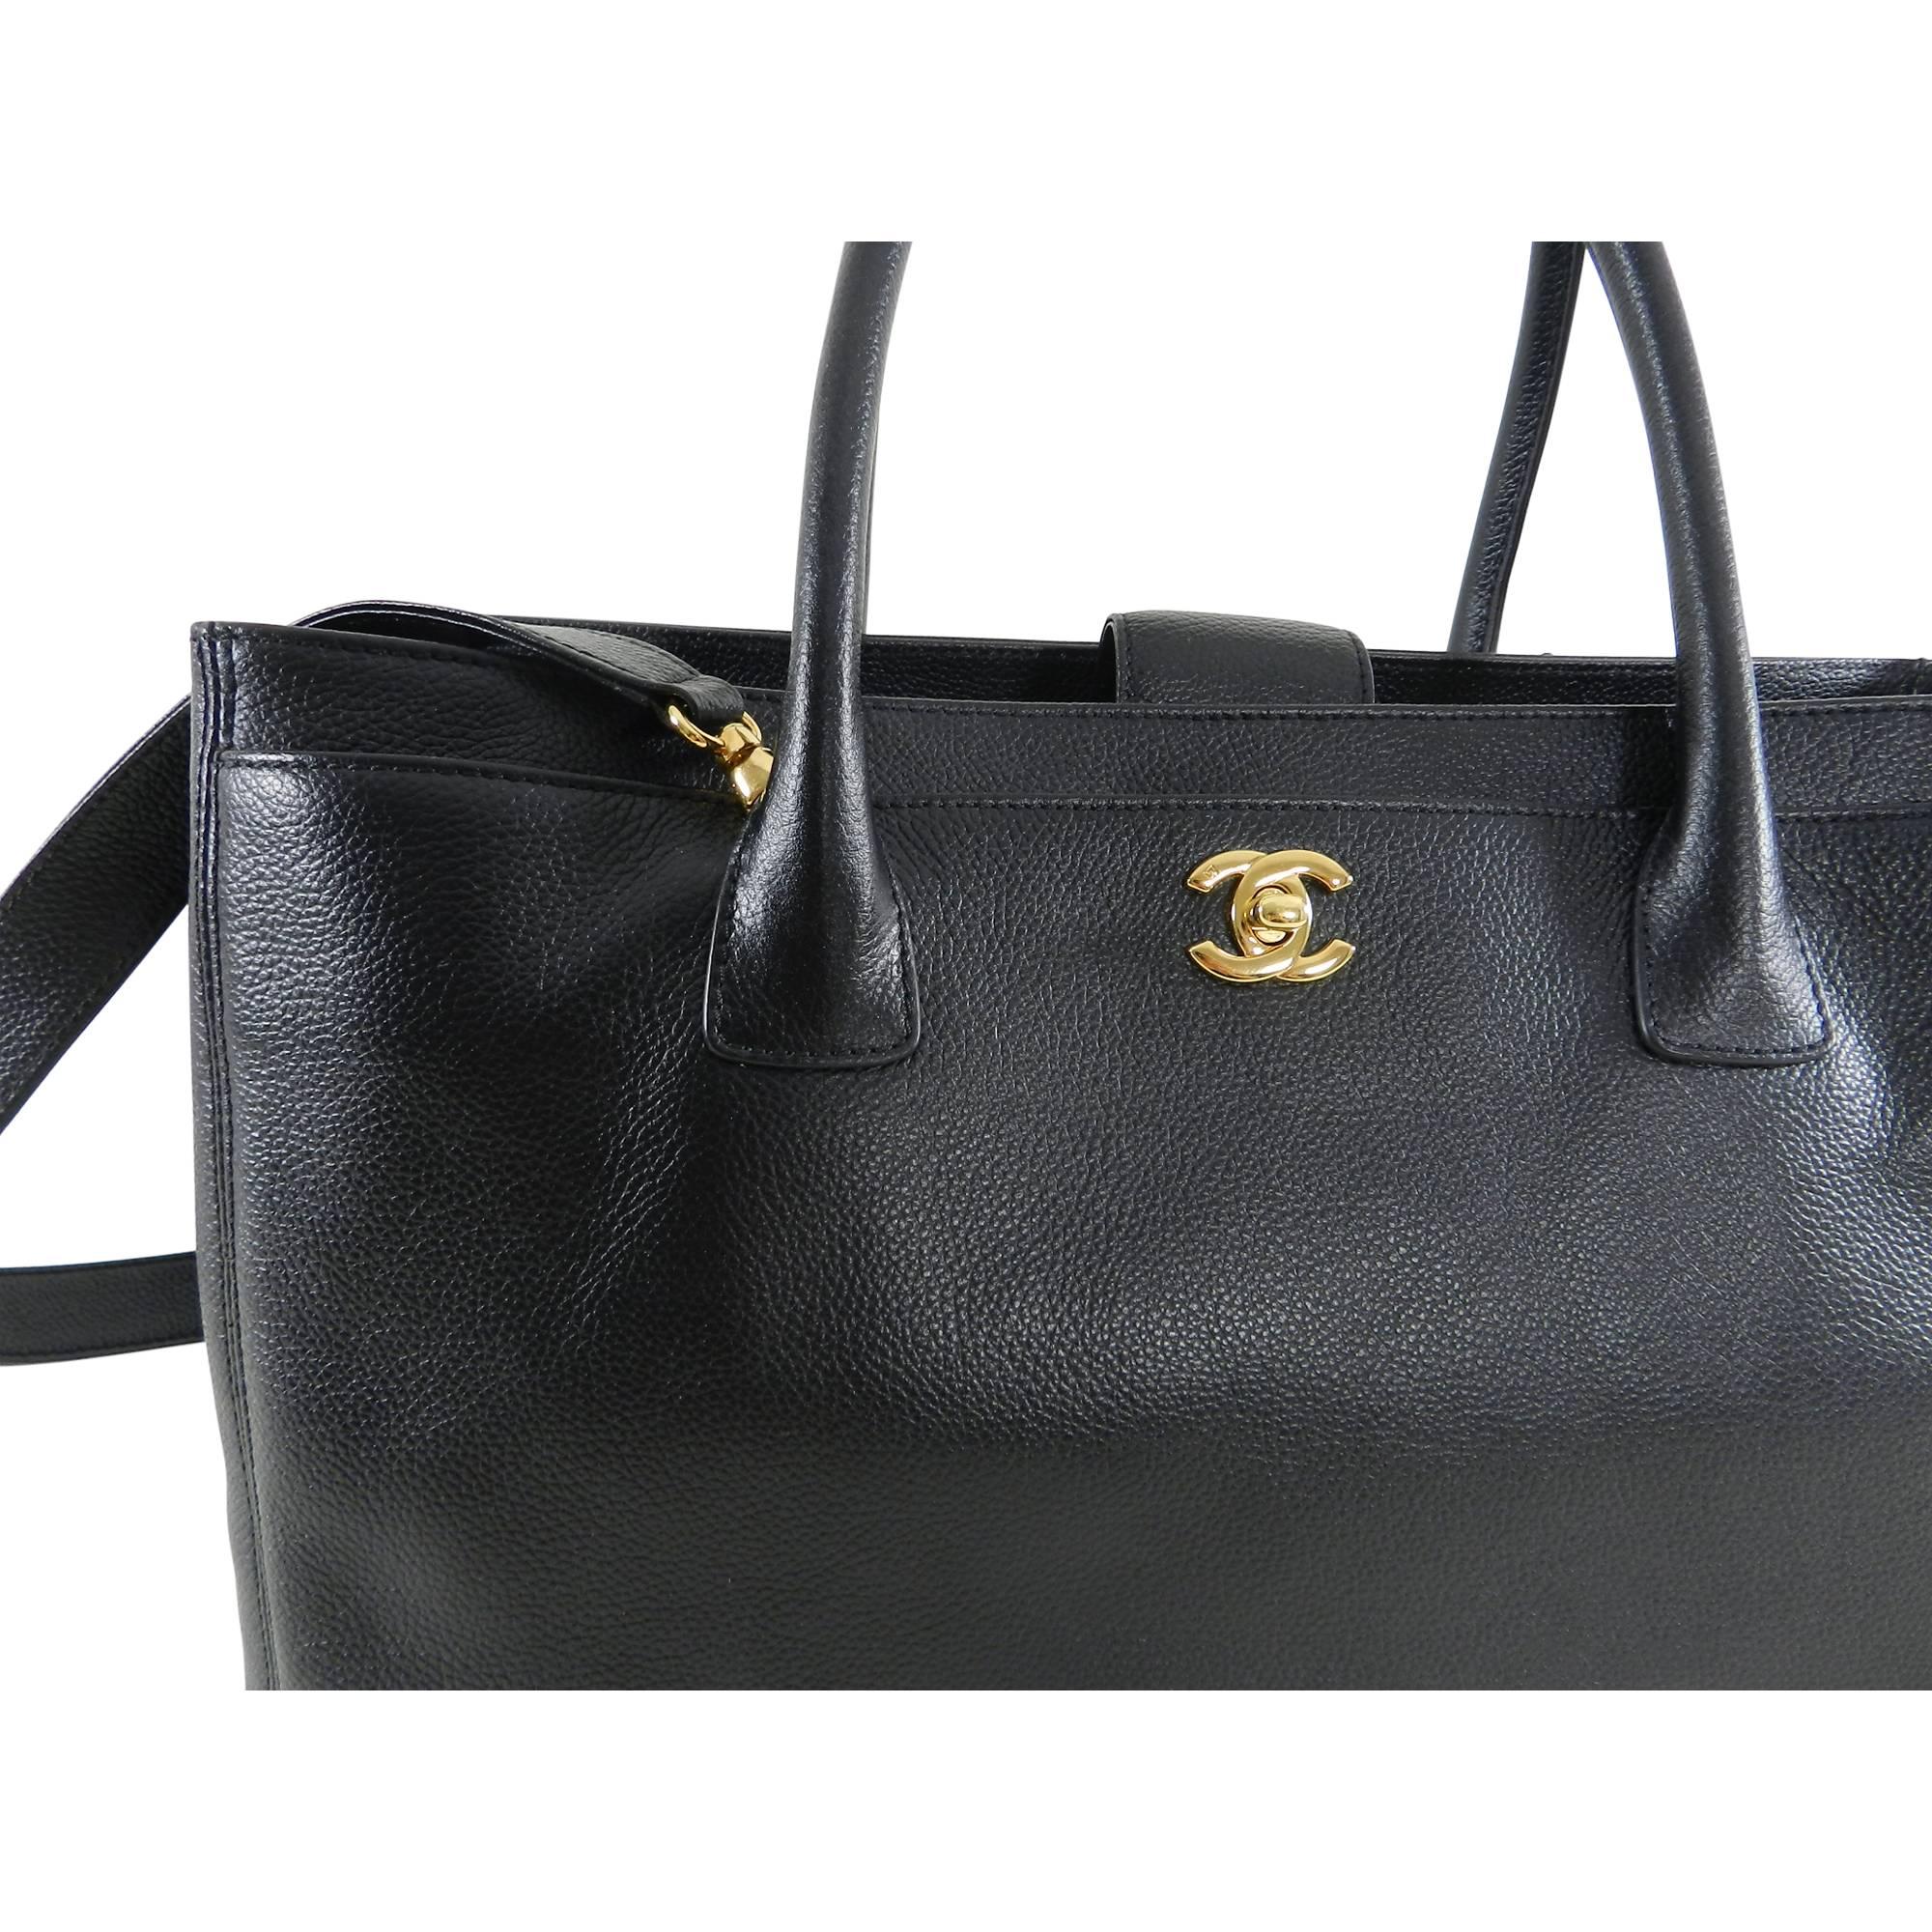 Chanel Black Executive Cerf Tote Bag Gold Hardware. This discontinued bag is perfect for work or play. Black grained calf leather, gold-tone CC logo turn clasp, shoulder strap.  Very excellent condition - only carried a few times.  No flaws to note.